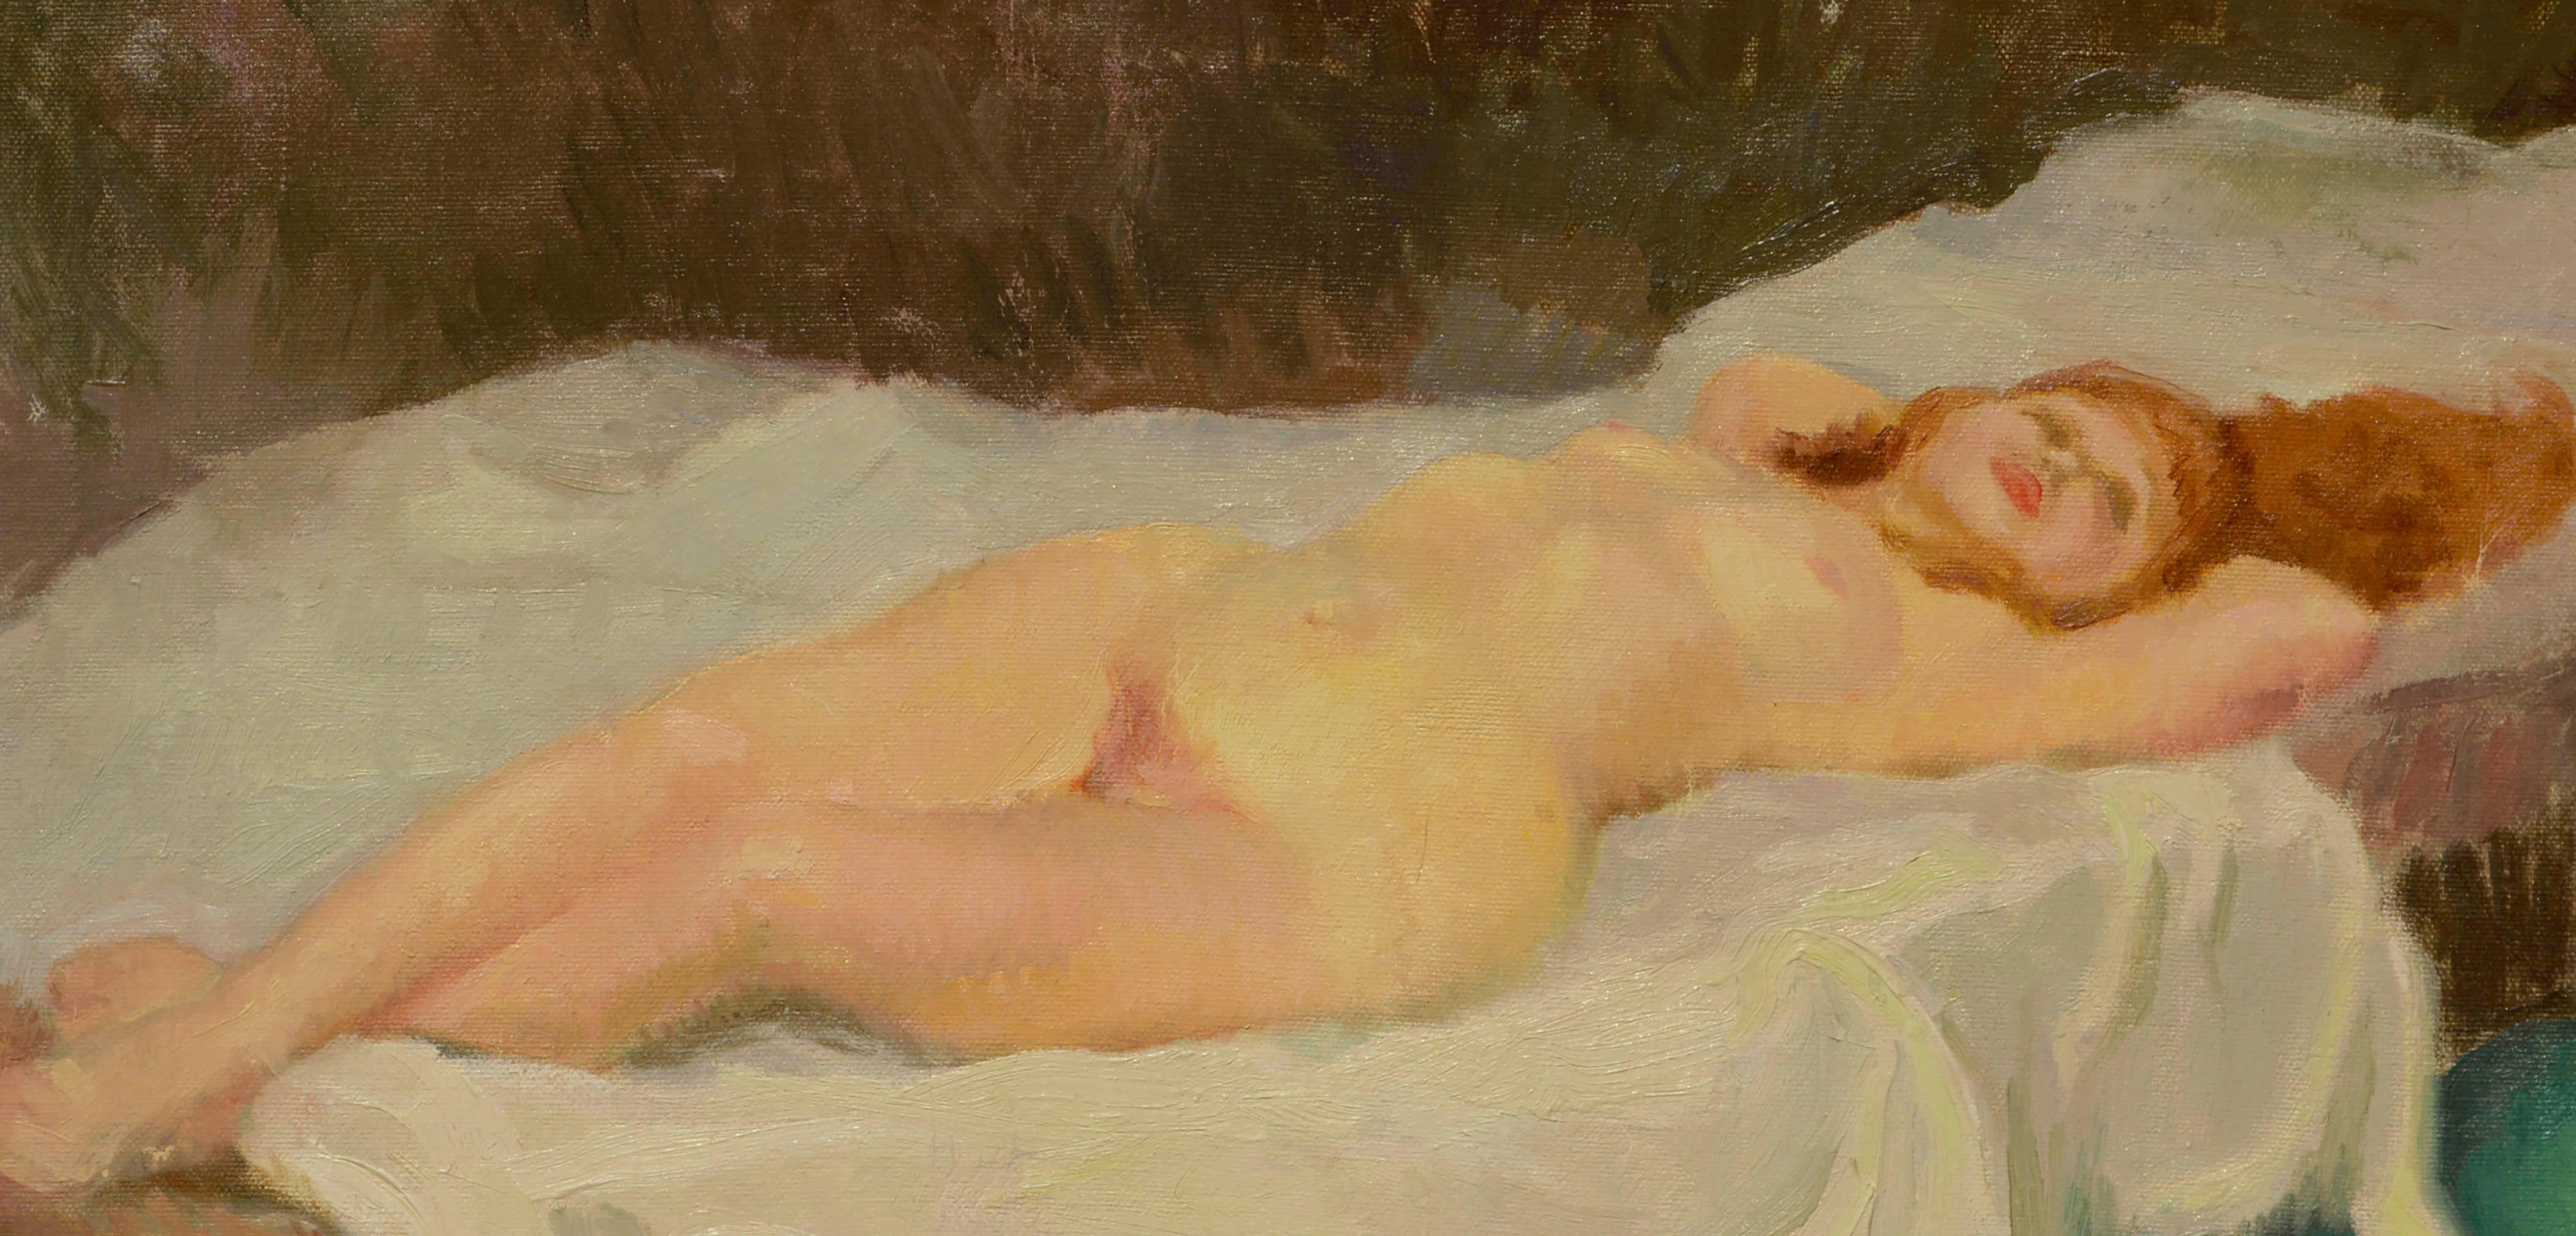 Reclining Red Headed Female Nude Figurative - Painting by Unknown